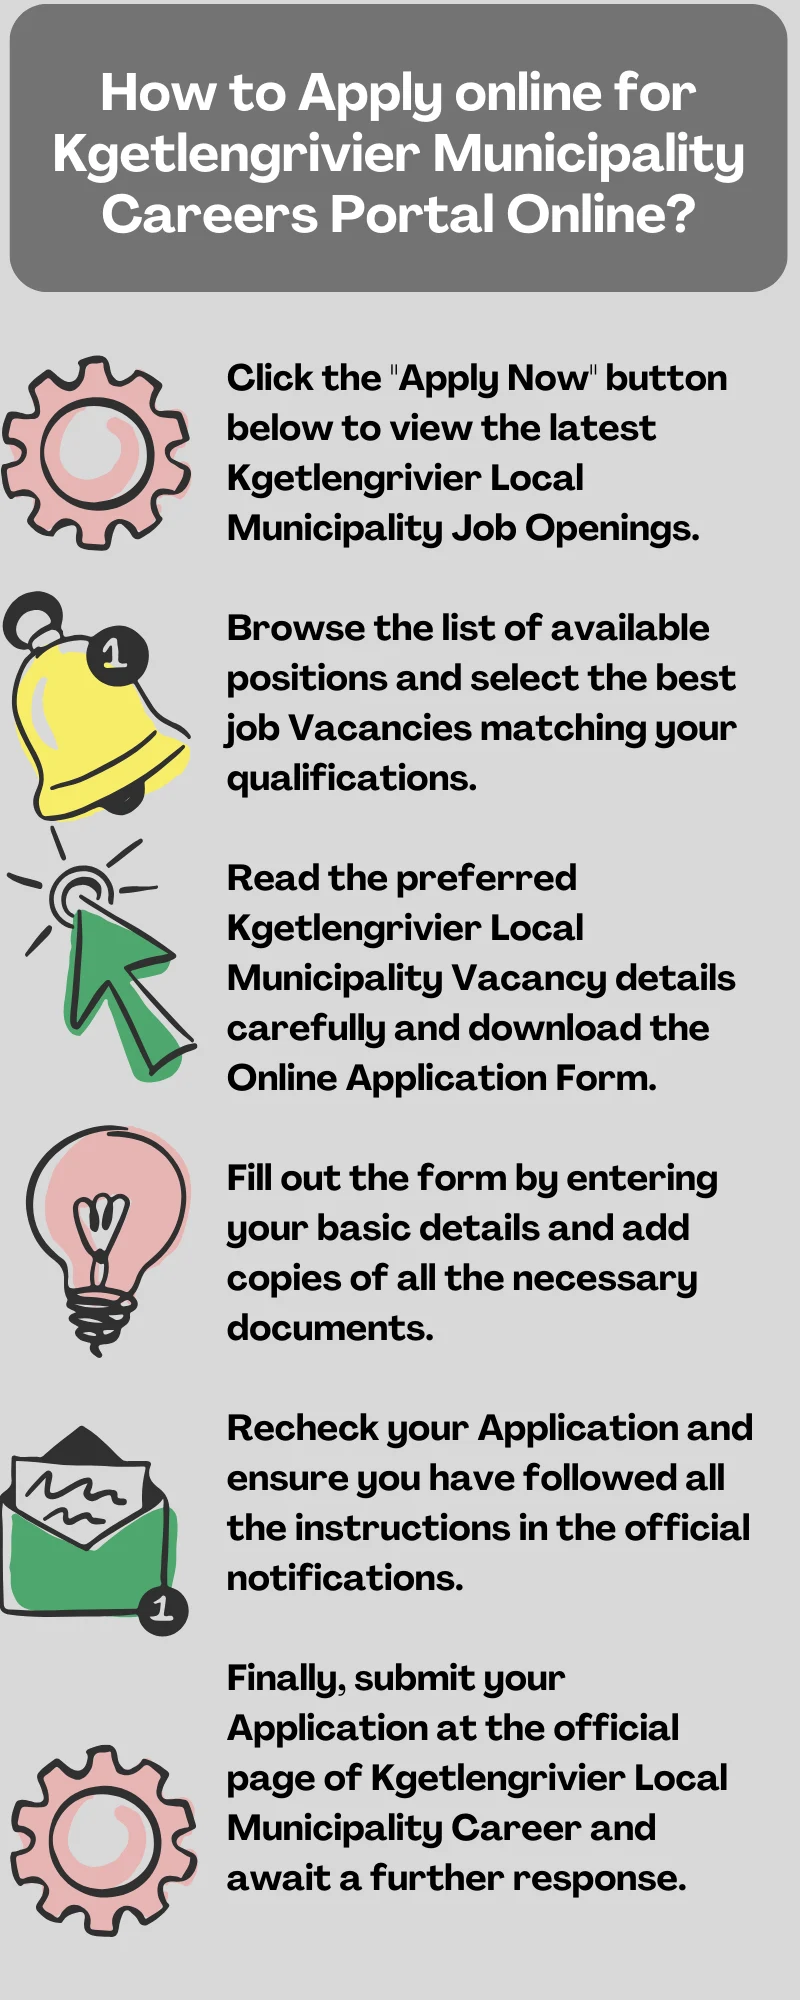 How to Apply online for Kgetlengrivier Municipality Careers Portal Online?